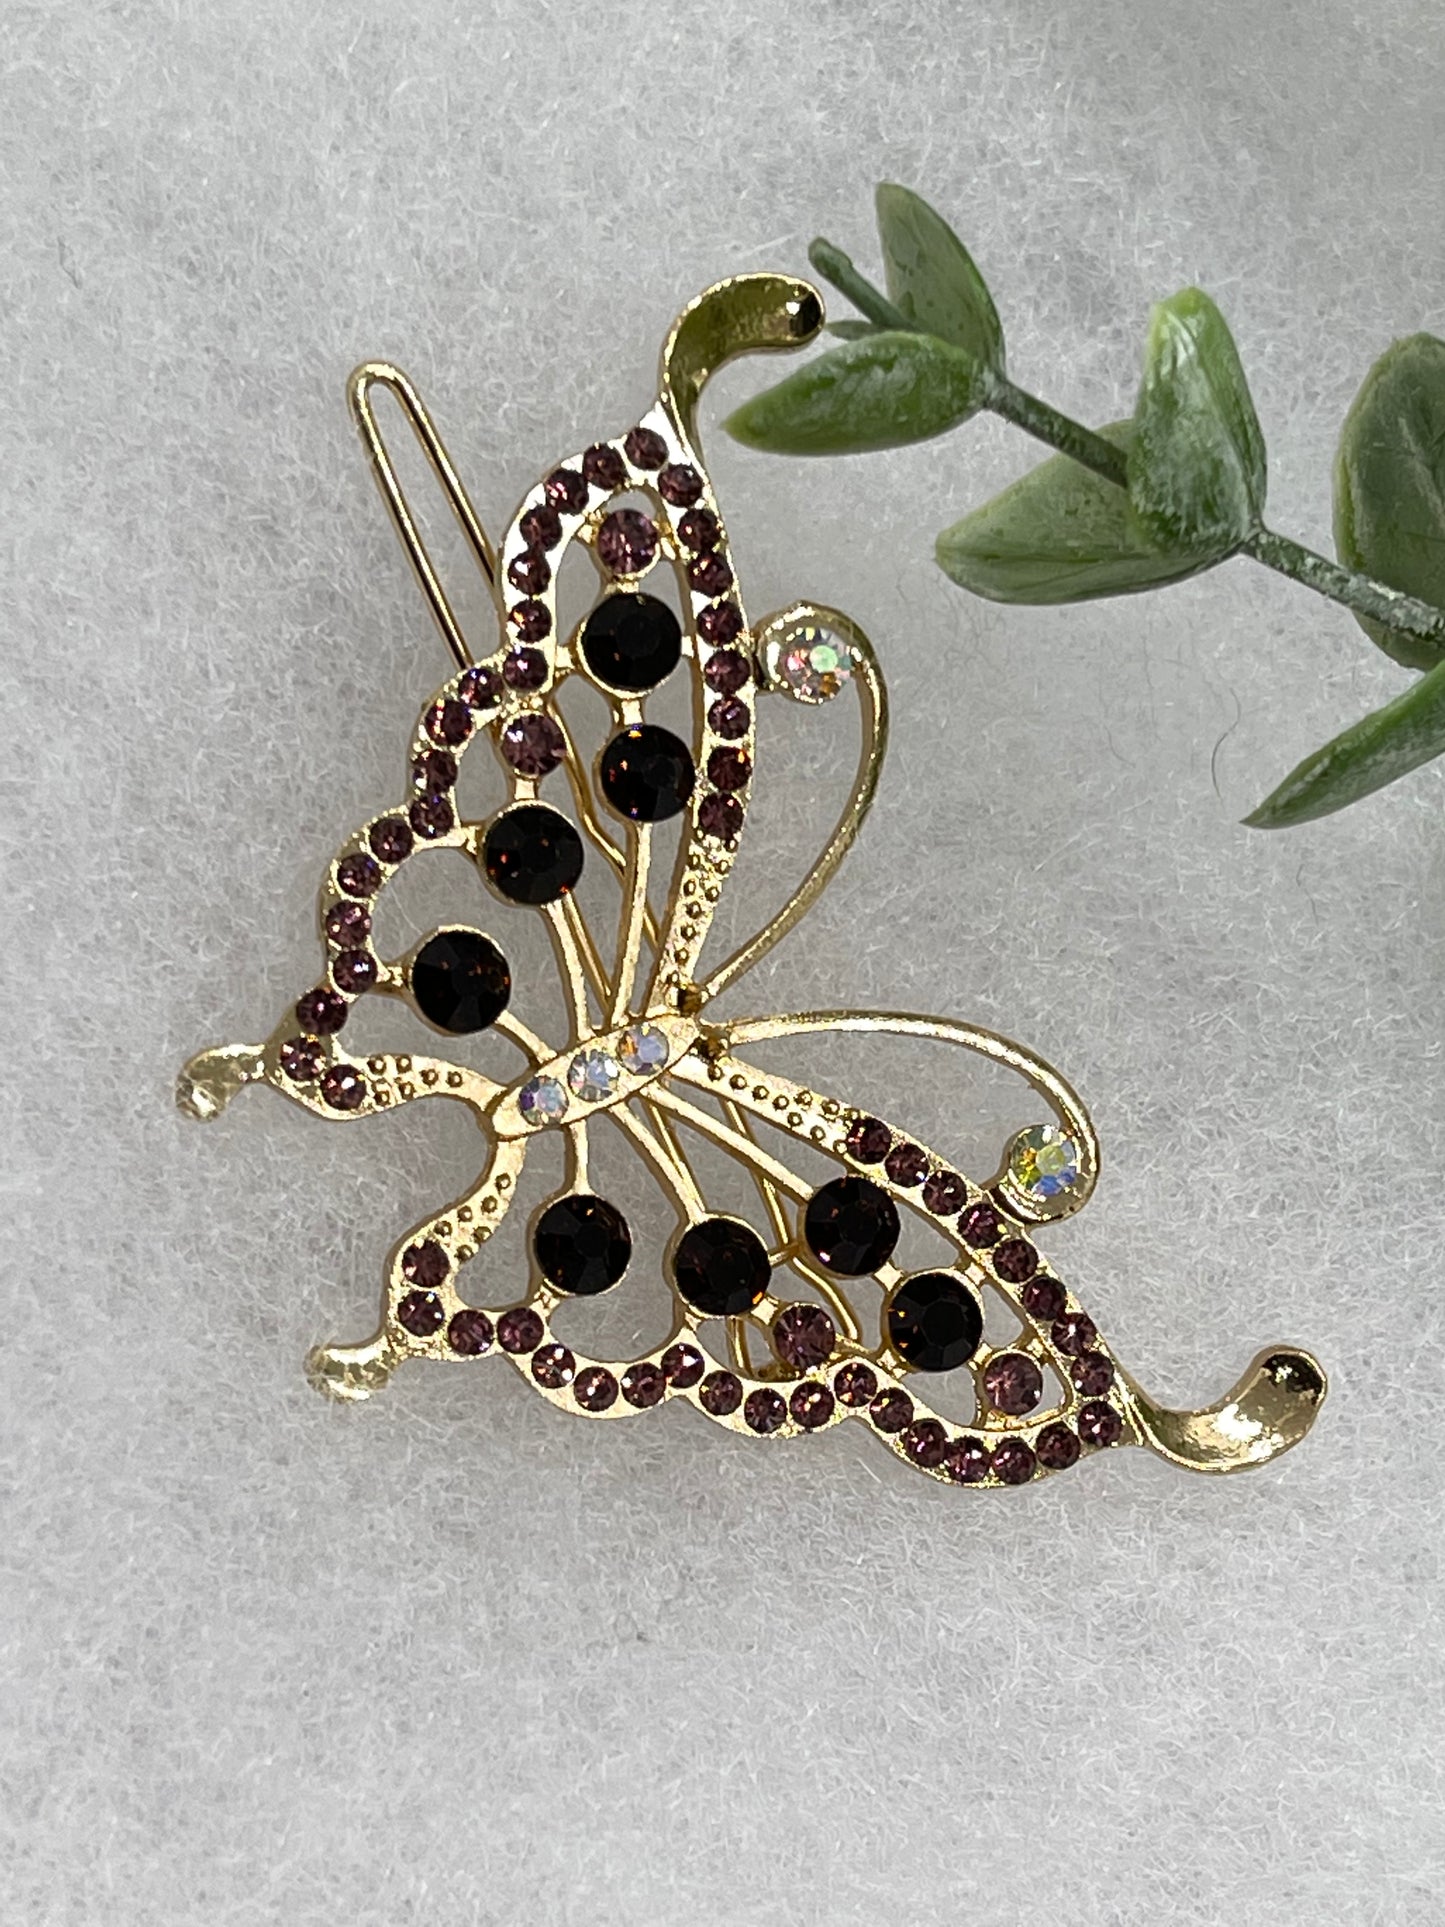 Purple gold butterfly Crystal Rhinestone Barrette approximately 3.5”Metal gold tone formal hair accessory